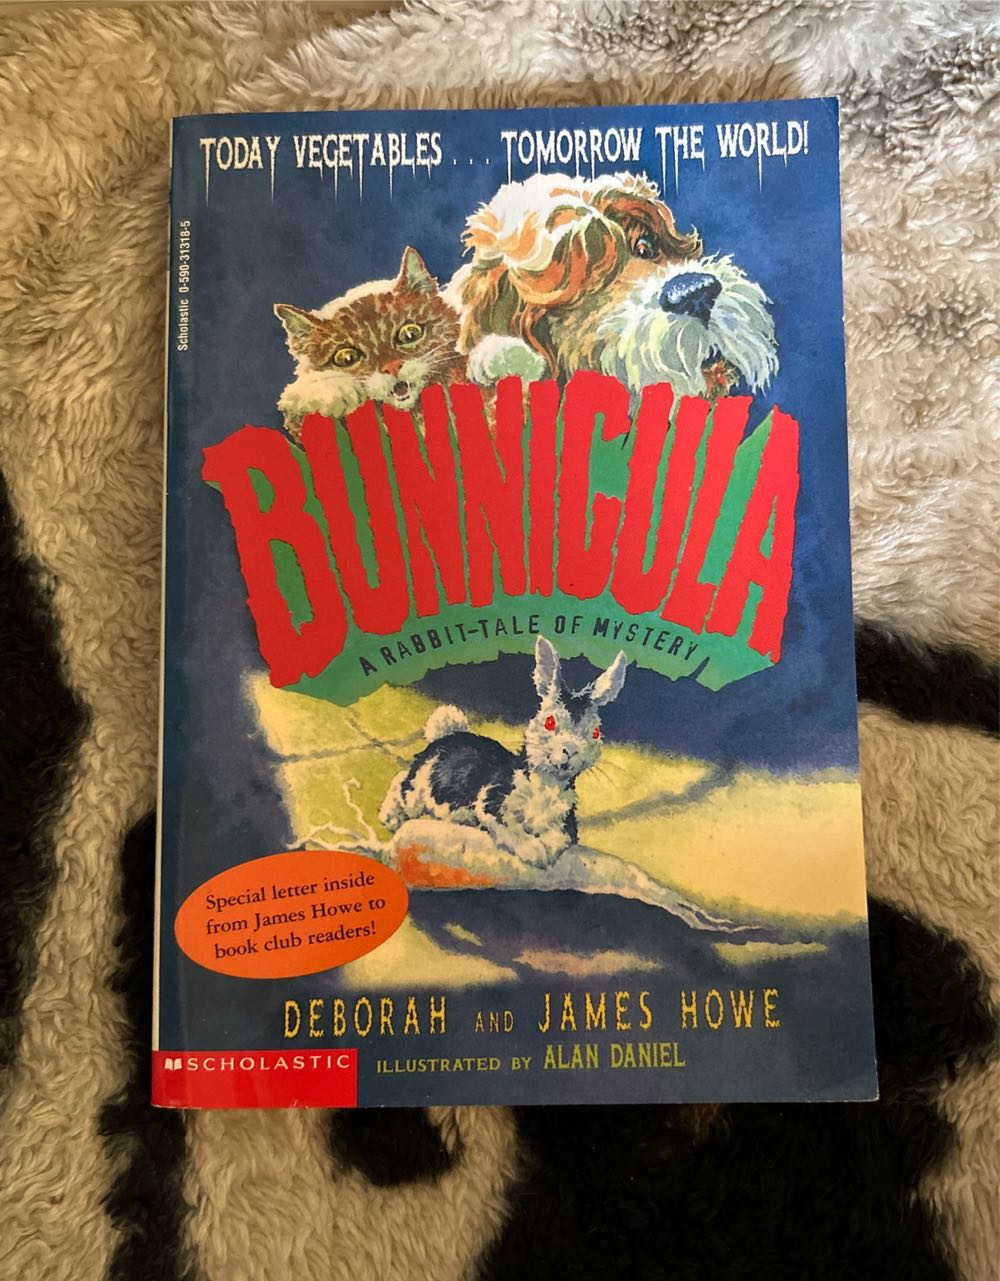 Book 1: Bunnicula A Rabbit-Tale of Mystery - James Howe (New York : Scholastic Press - Paperback) book collectible [Barcode 9780590313186] - Main Image 3